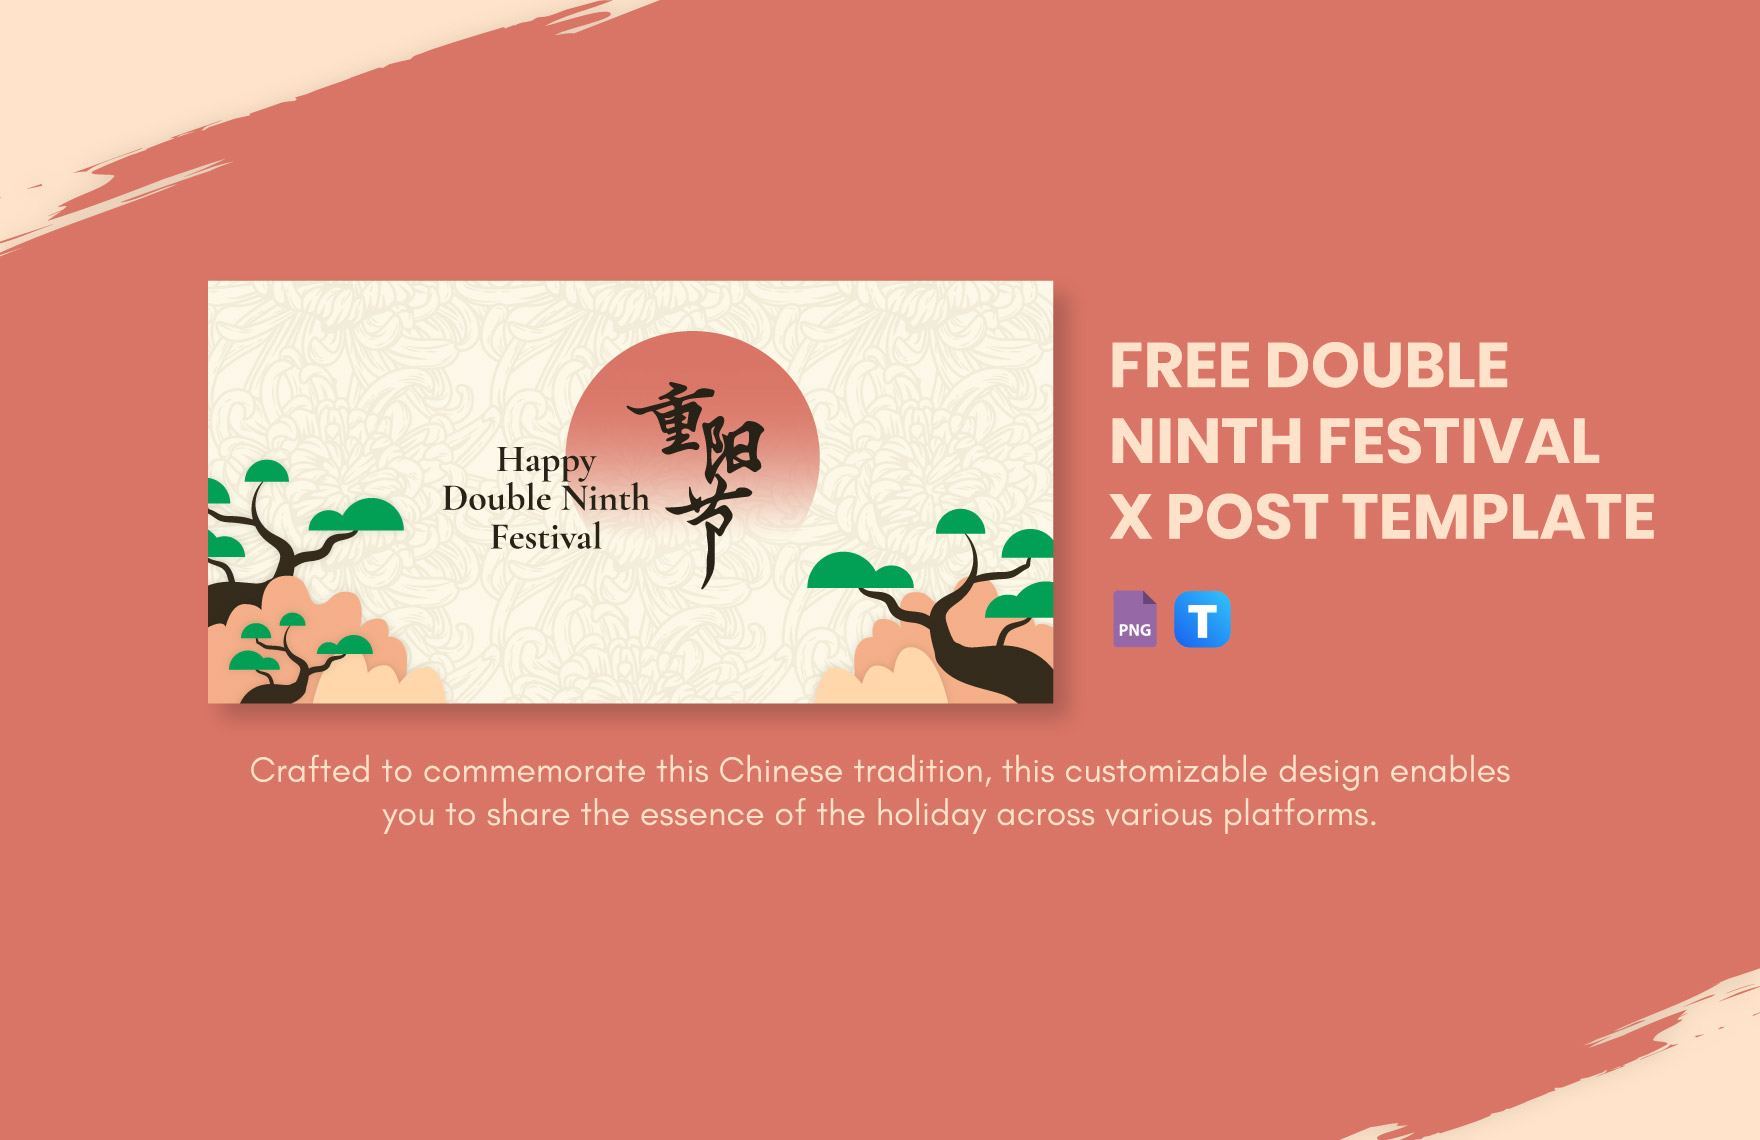 Free Double Ninth Festival X Post Template in PNG